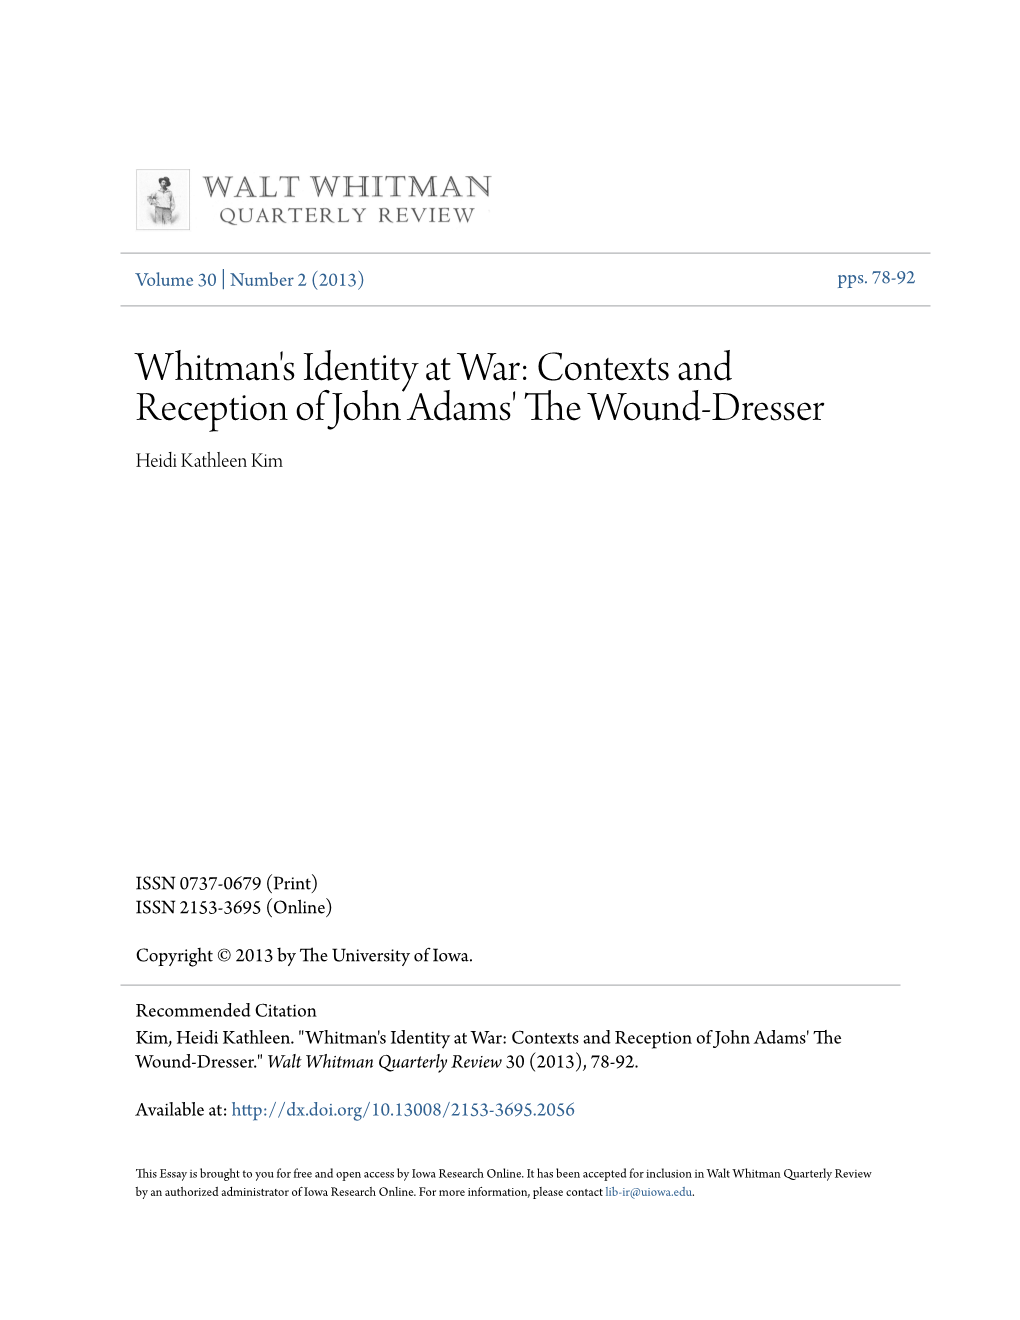 Contexts and Reception of John Adams' the Wound-Dresser." Walt Whitman Quarterly Review 30 (2013), 78-92